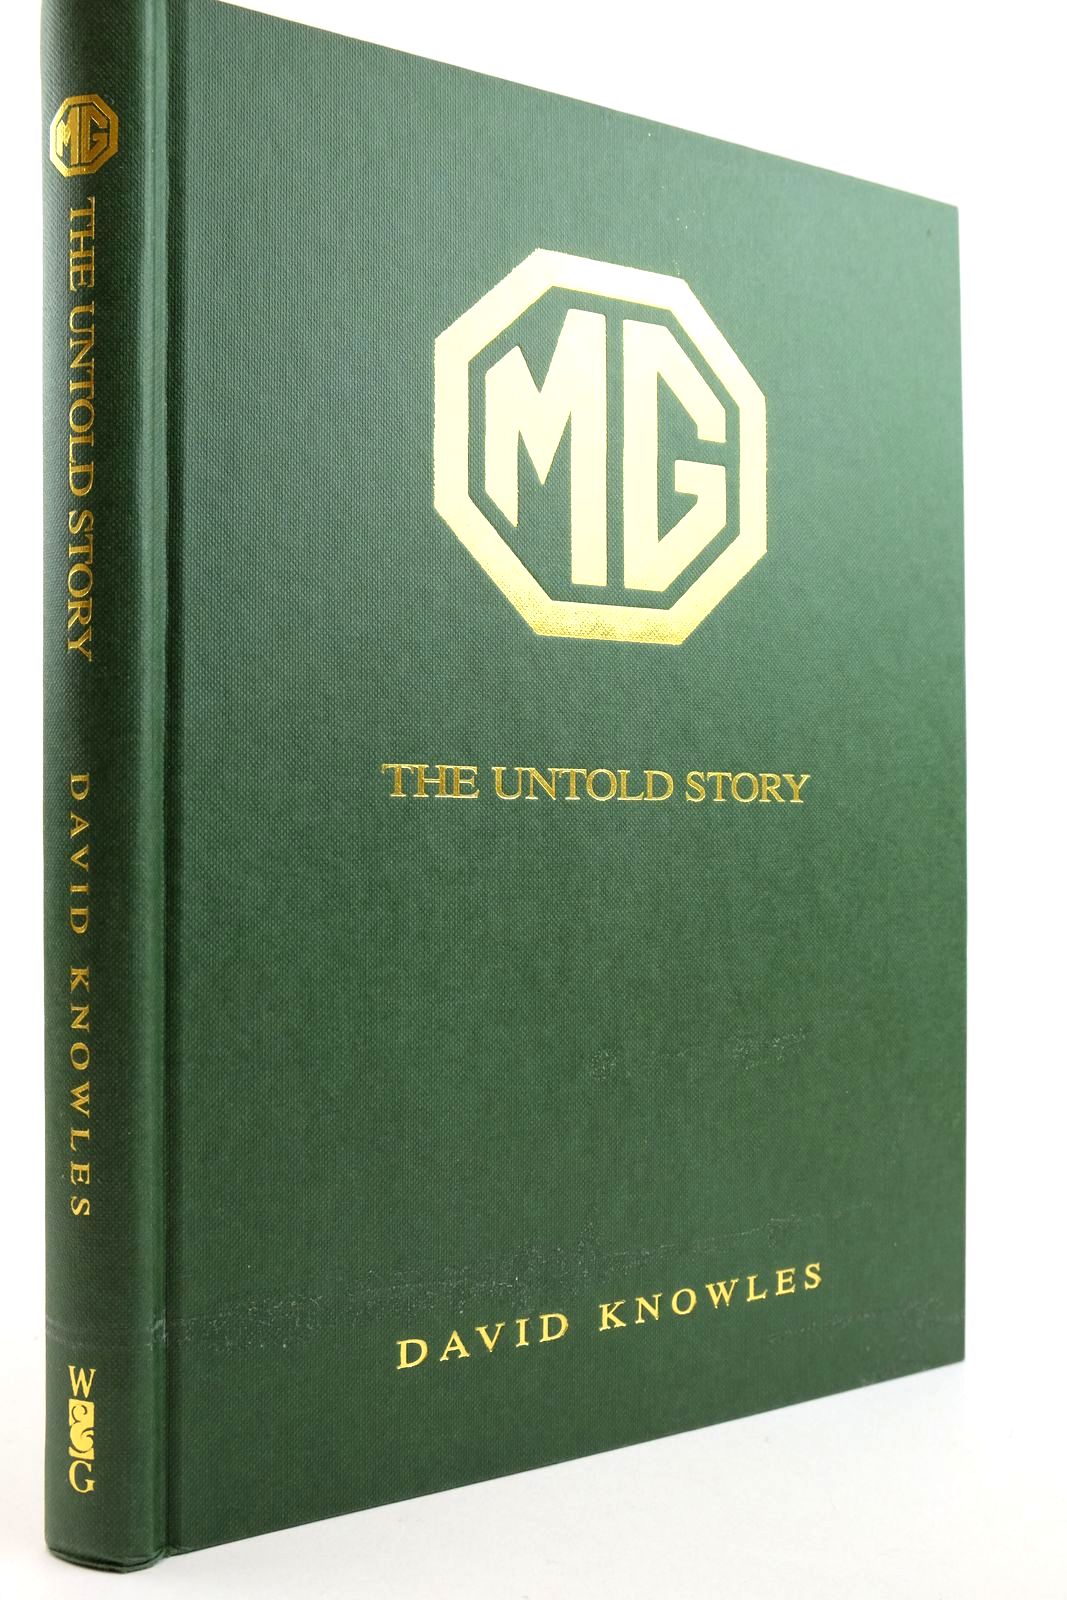 Photo of MG THE UNTOLD STORY written by Knowles, David published by Windrow & Greene (STOCK CODE: 2132911)  for sale by Stella & Rose's Books